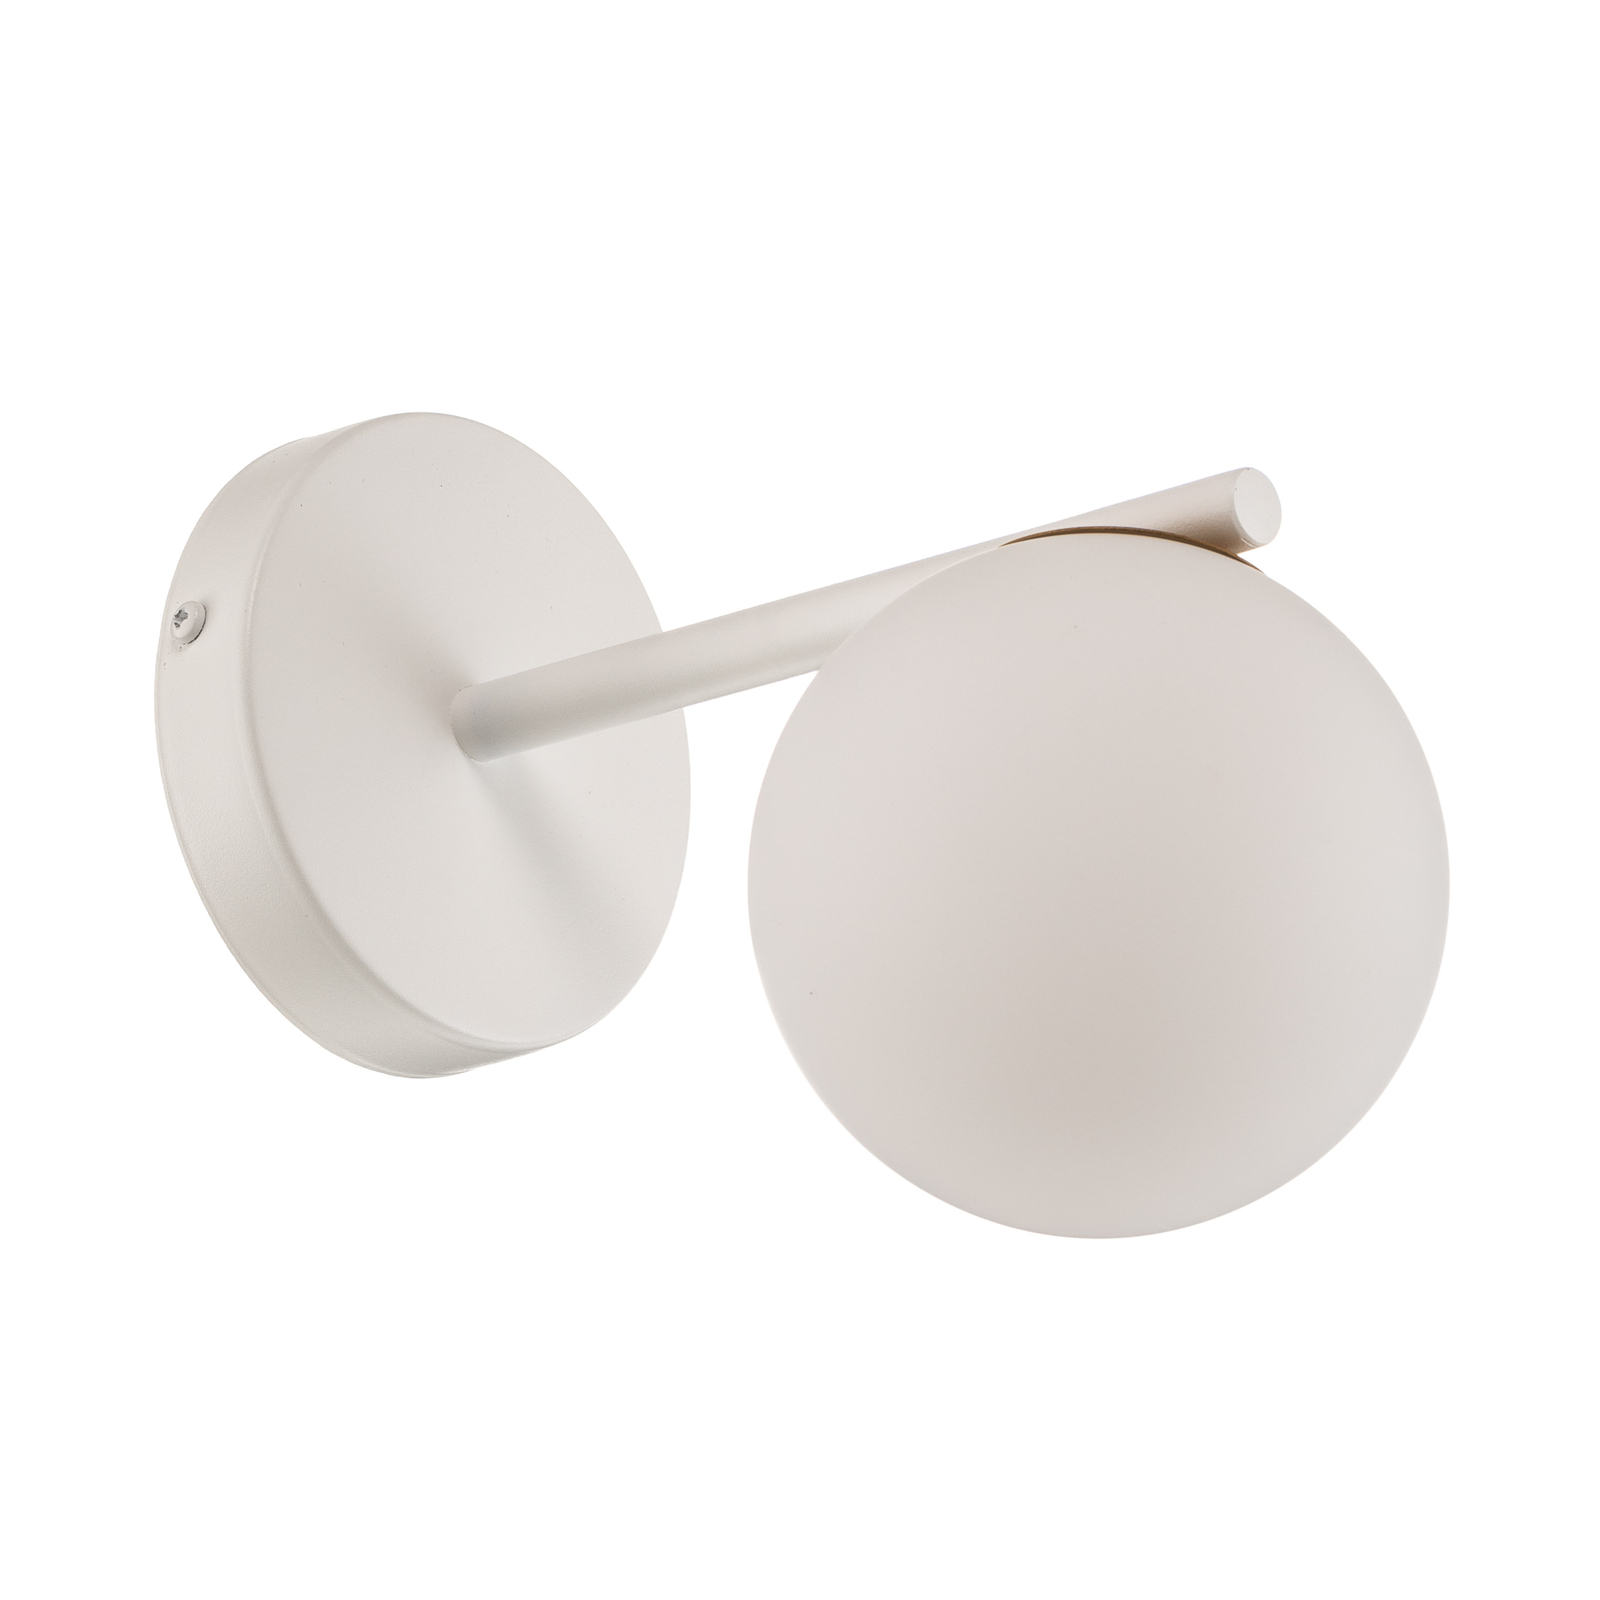 Gama wall light in white with glass globe